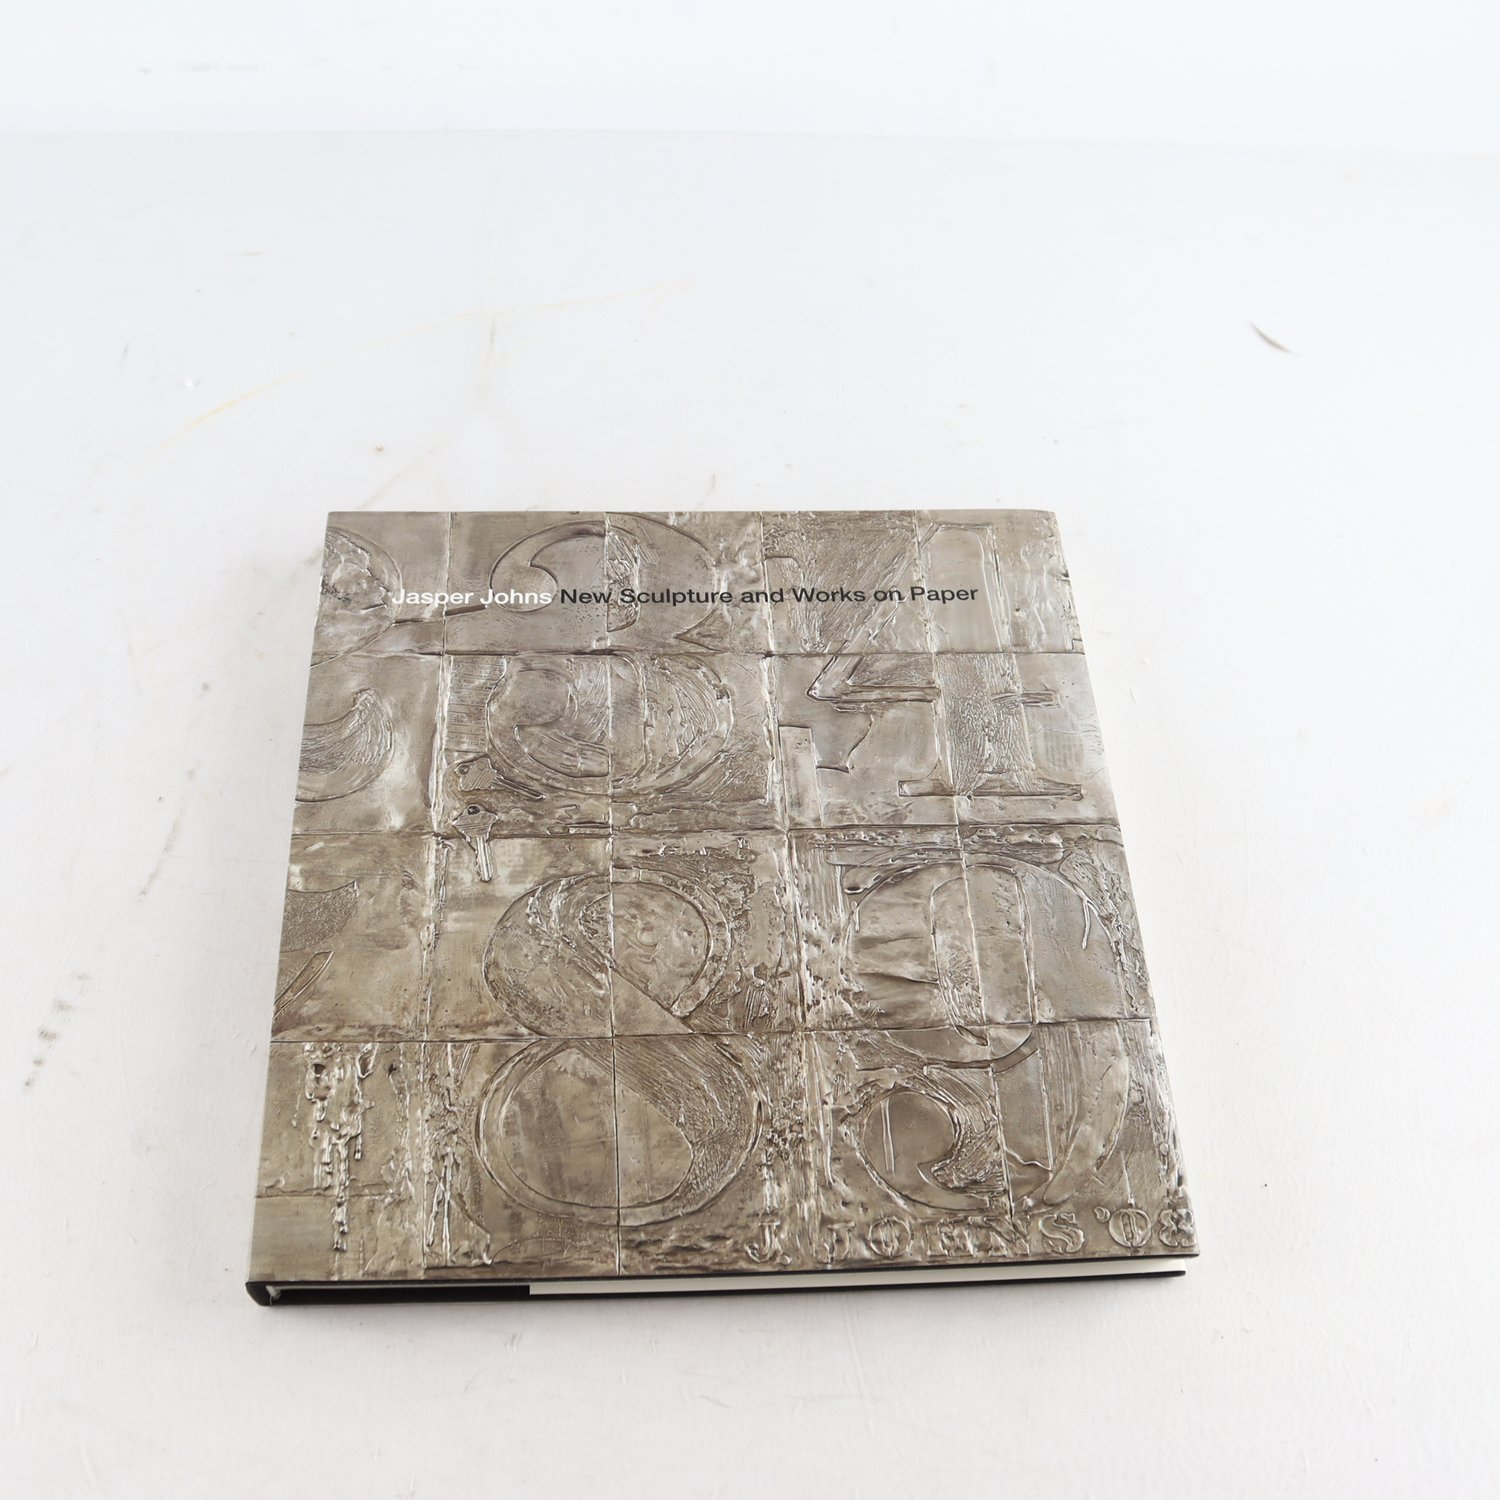 Jasper Johns, New Sculpture and Works on Paper